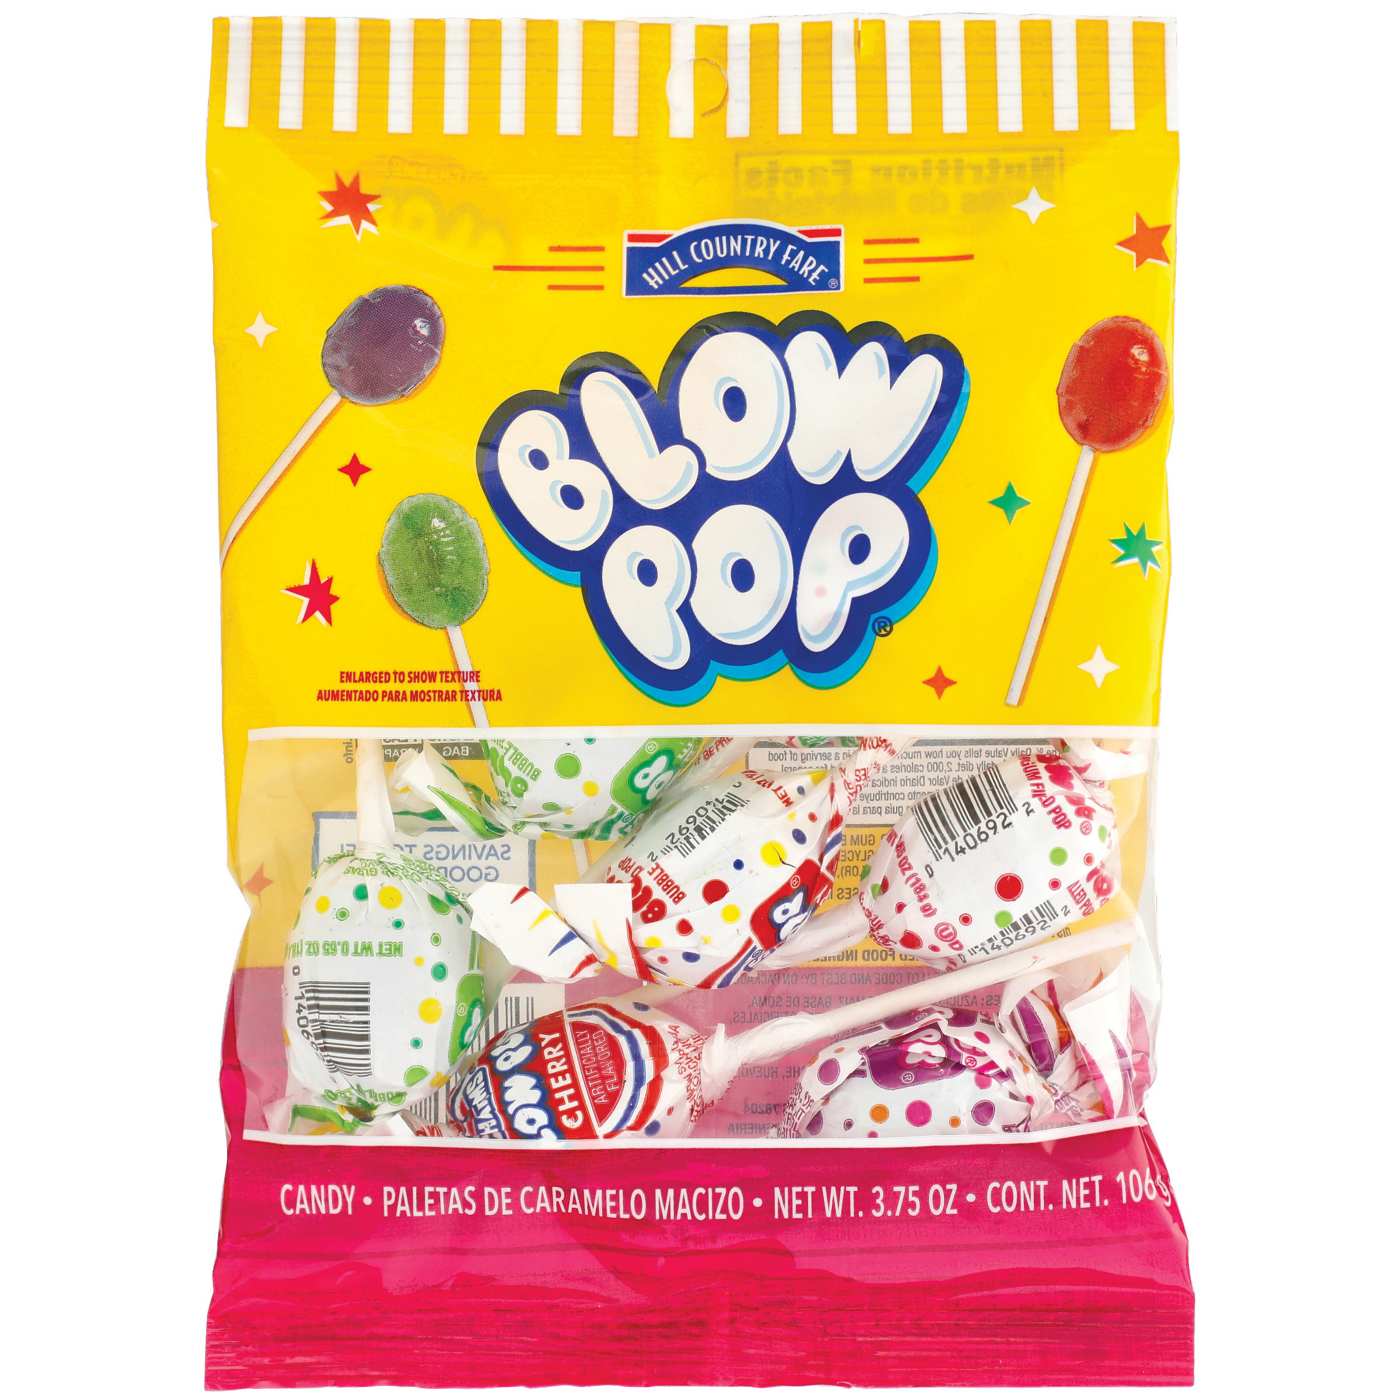 Hill Country Fare Blow Pop Assorted Lollipops; image 1 of 2